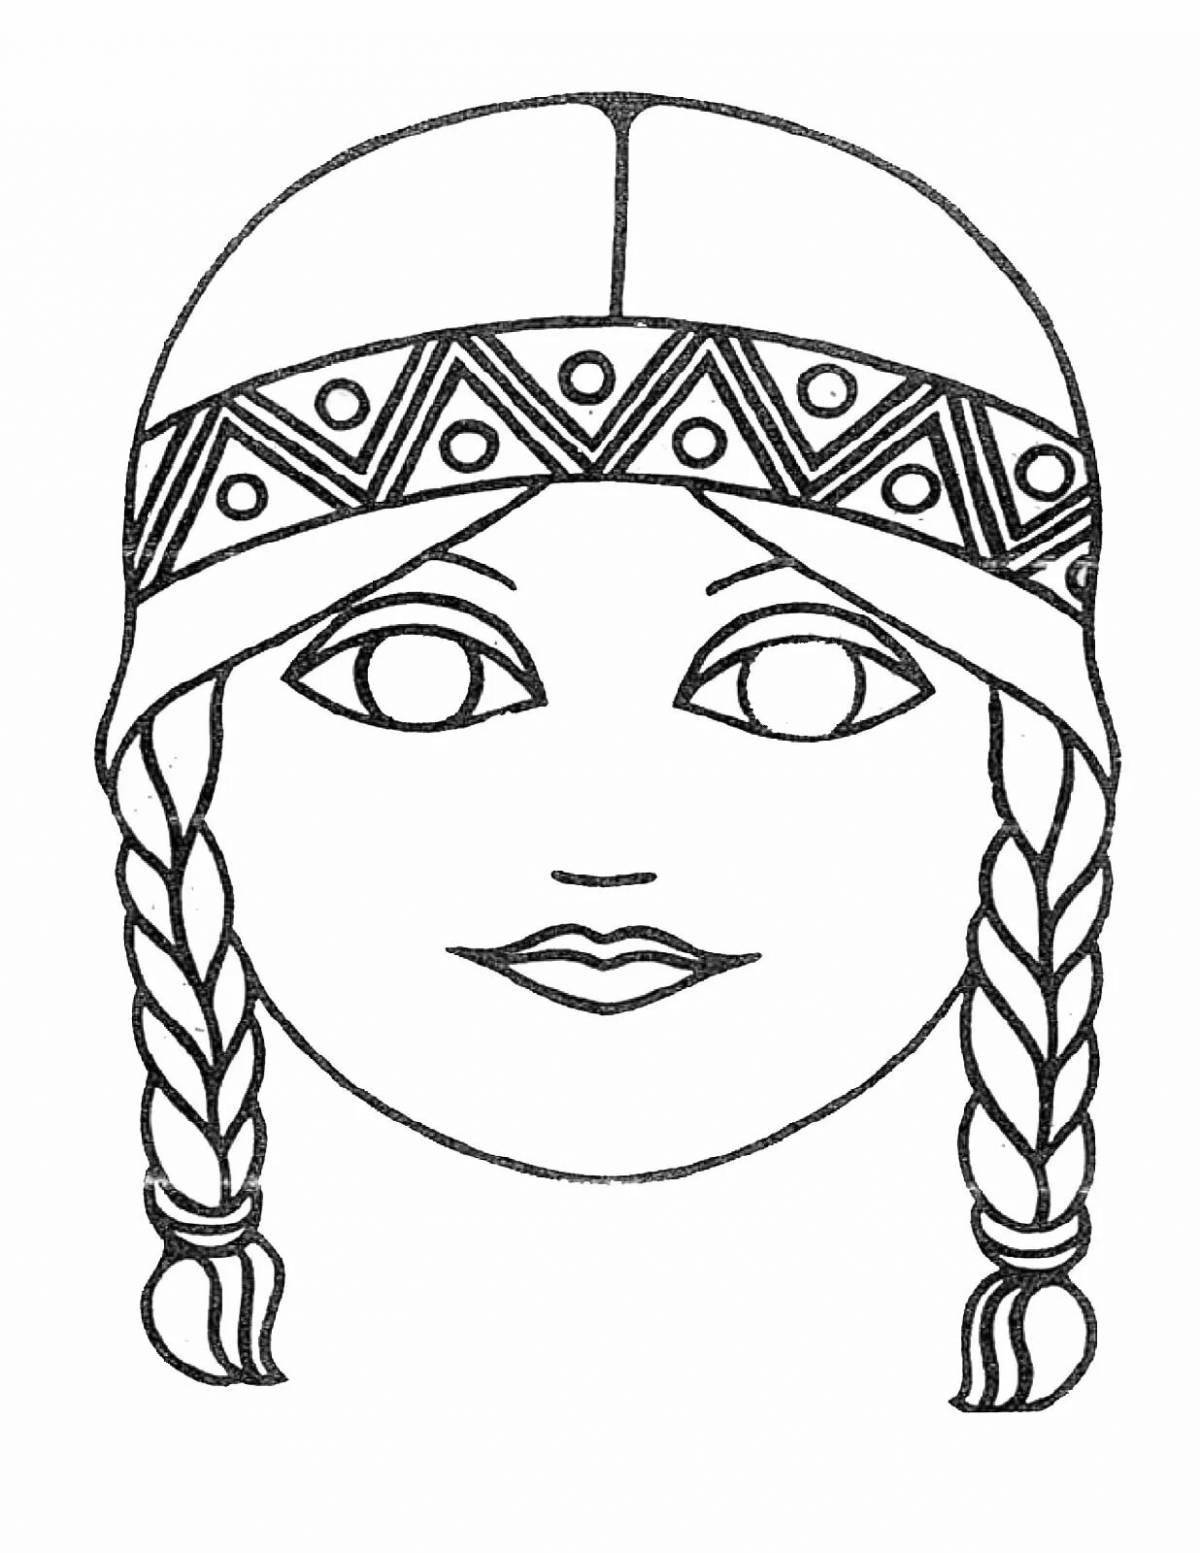 Coloring for the elegant face of the snow maiden